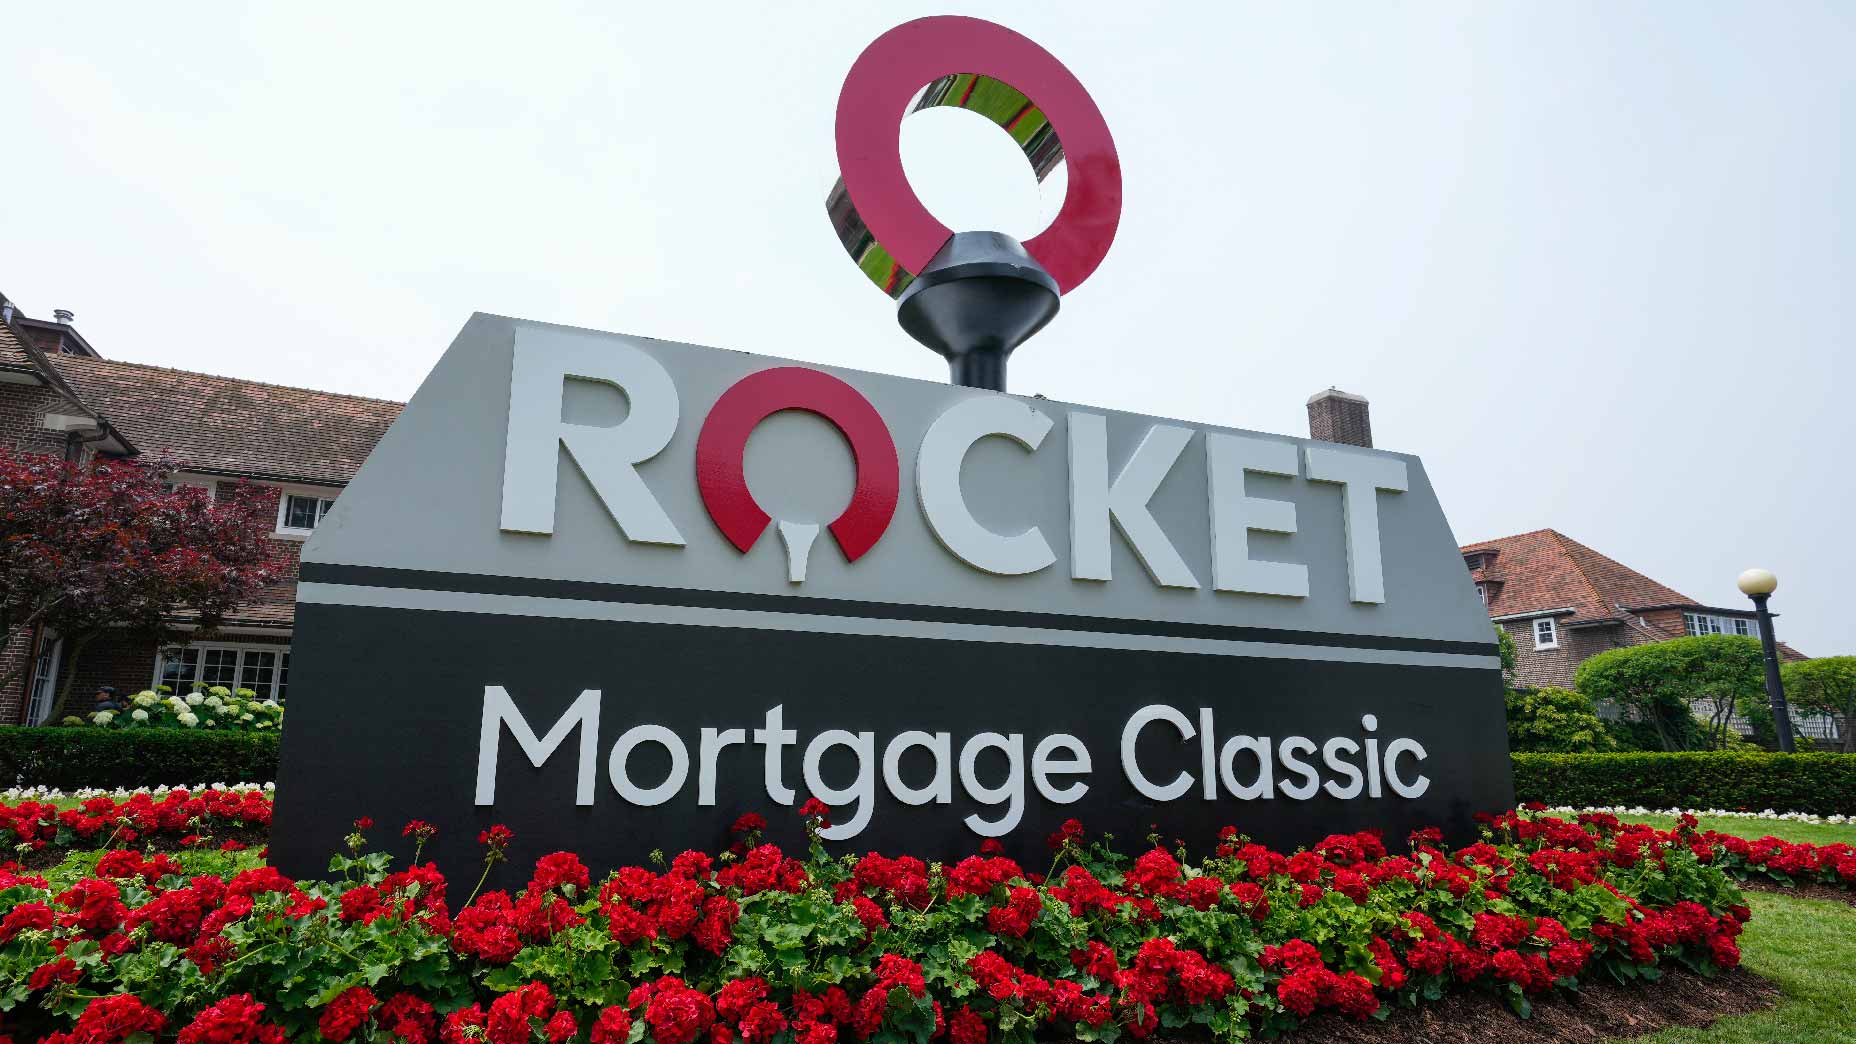 How to watch the 2023 Rocket Mortgage Classic on Friday Round 2 live